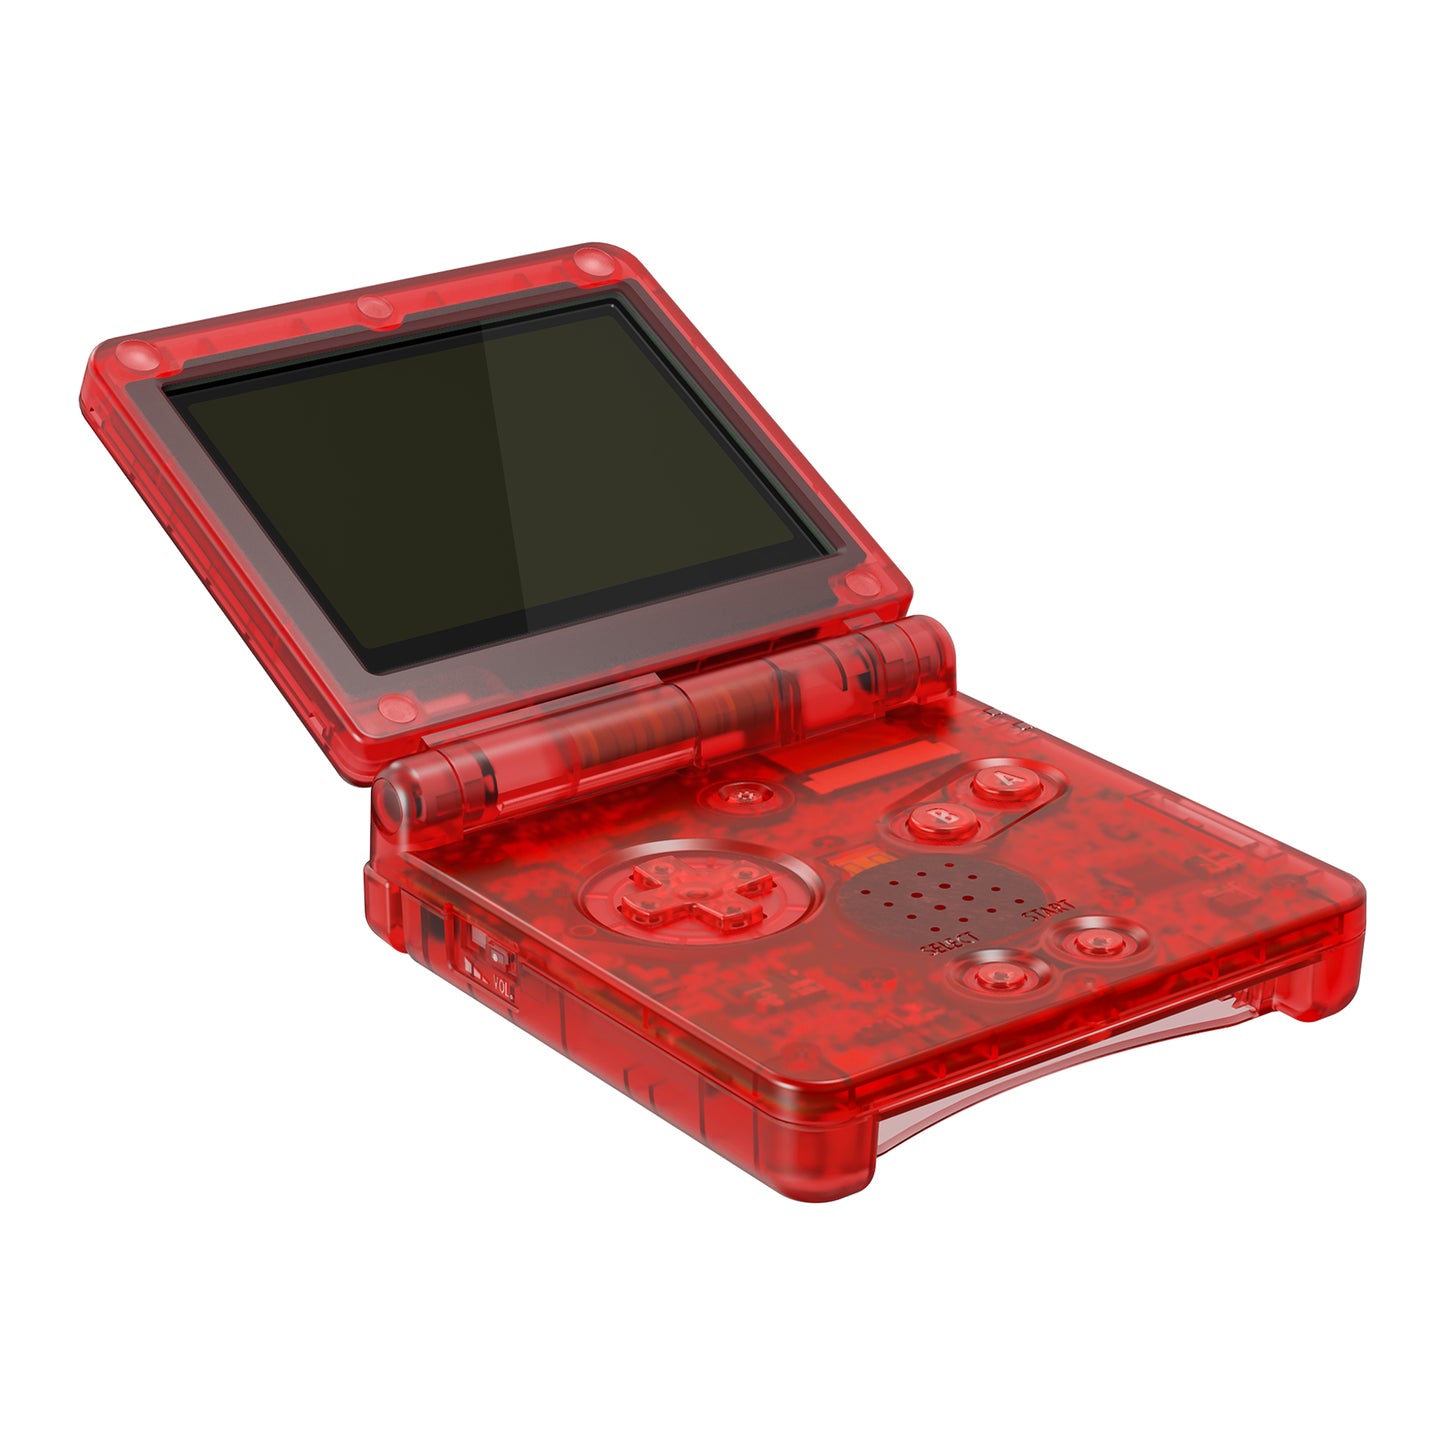 eXtremeRate Retail IPS Ready Upgraded eXtremeRate Clear Red Custom Replacement Housing Shell for Gameboy Advance SP GBA SP – Compatible with Both IPS & Standard LCD – Console & Screen NOT Included - ASPM5002